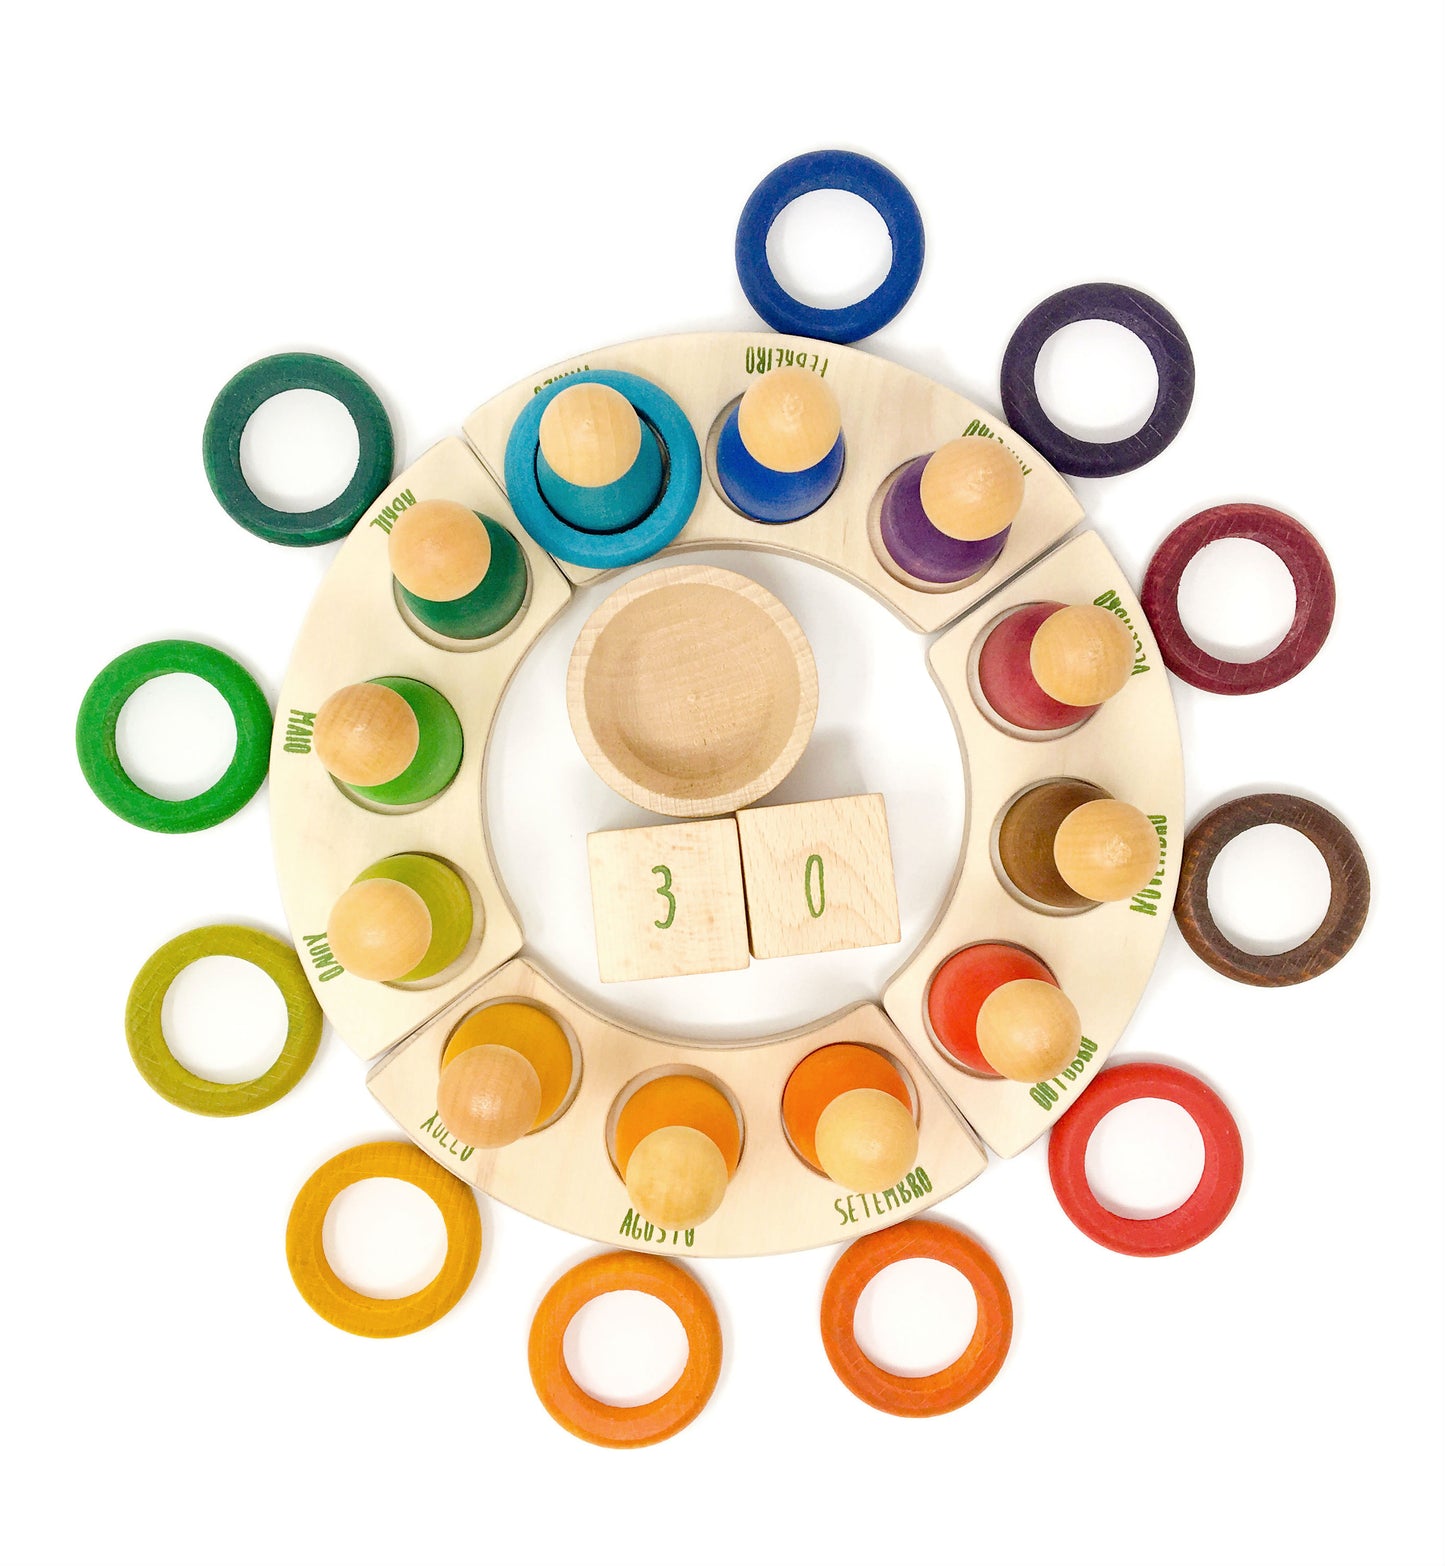 The Grapat perpetual calendar from the top with each of the 12 wooden rings arranged outside